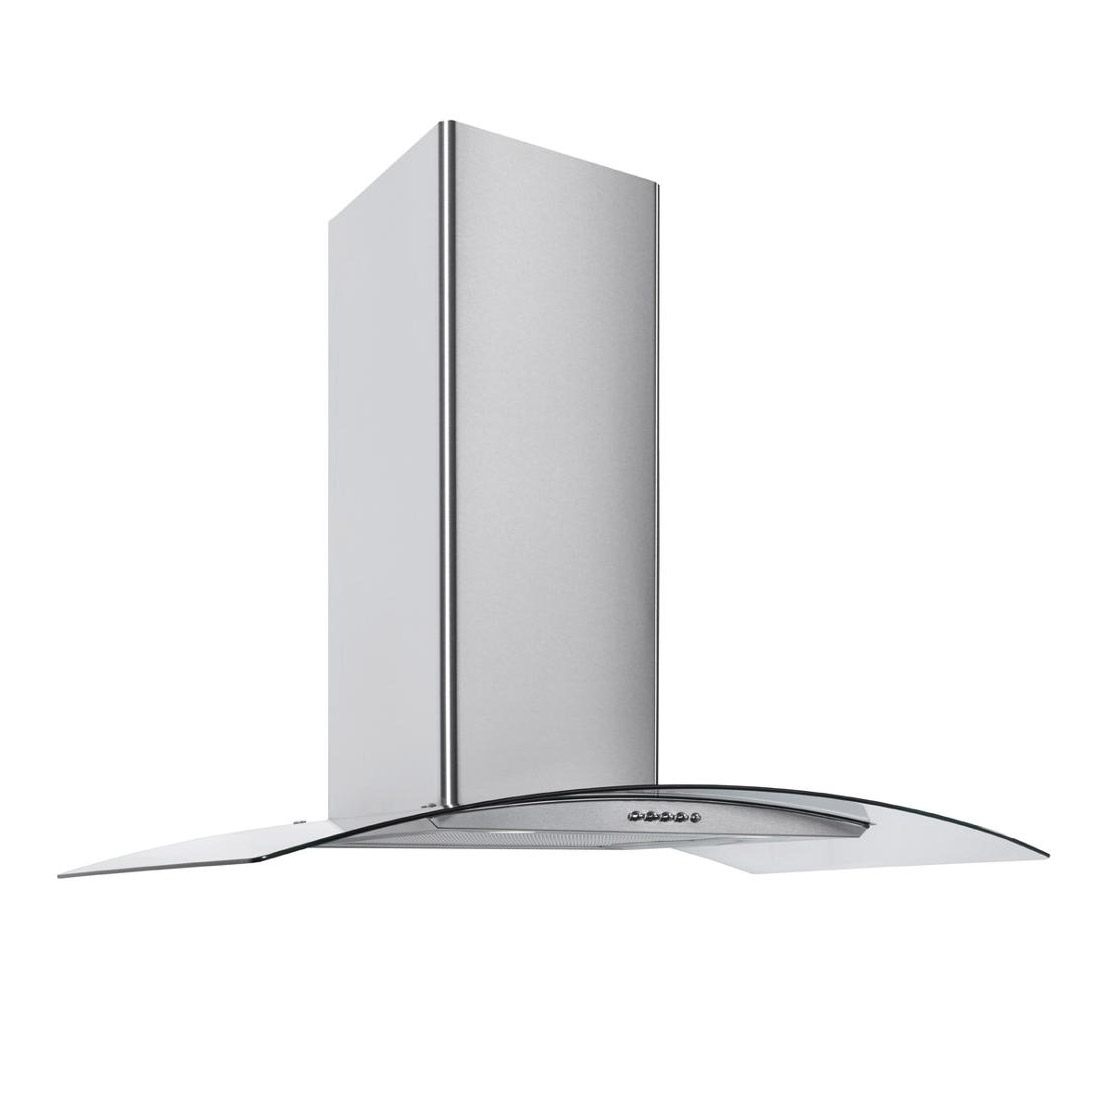 Image of Culina CG60SSPF 60cm Curved Glass Chimney Hood in St Steel 3 Speed Fan